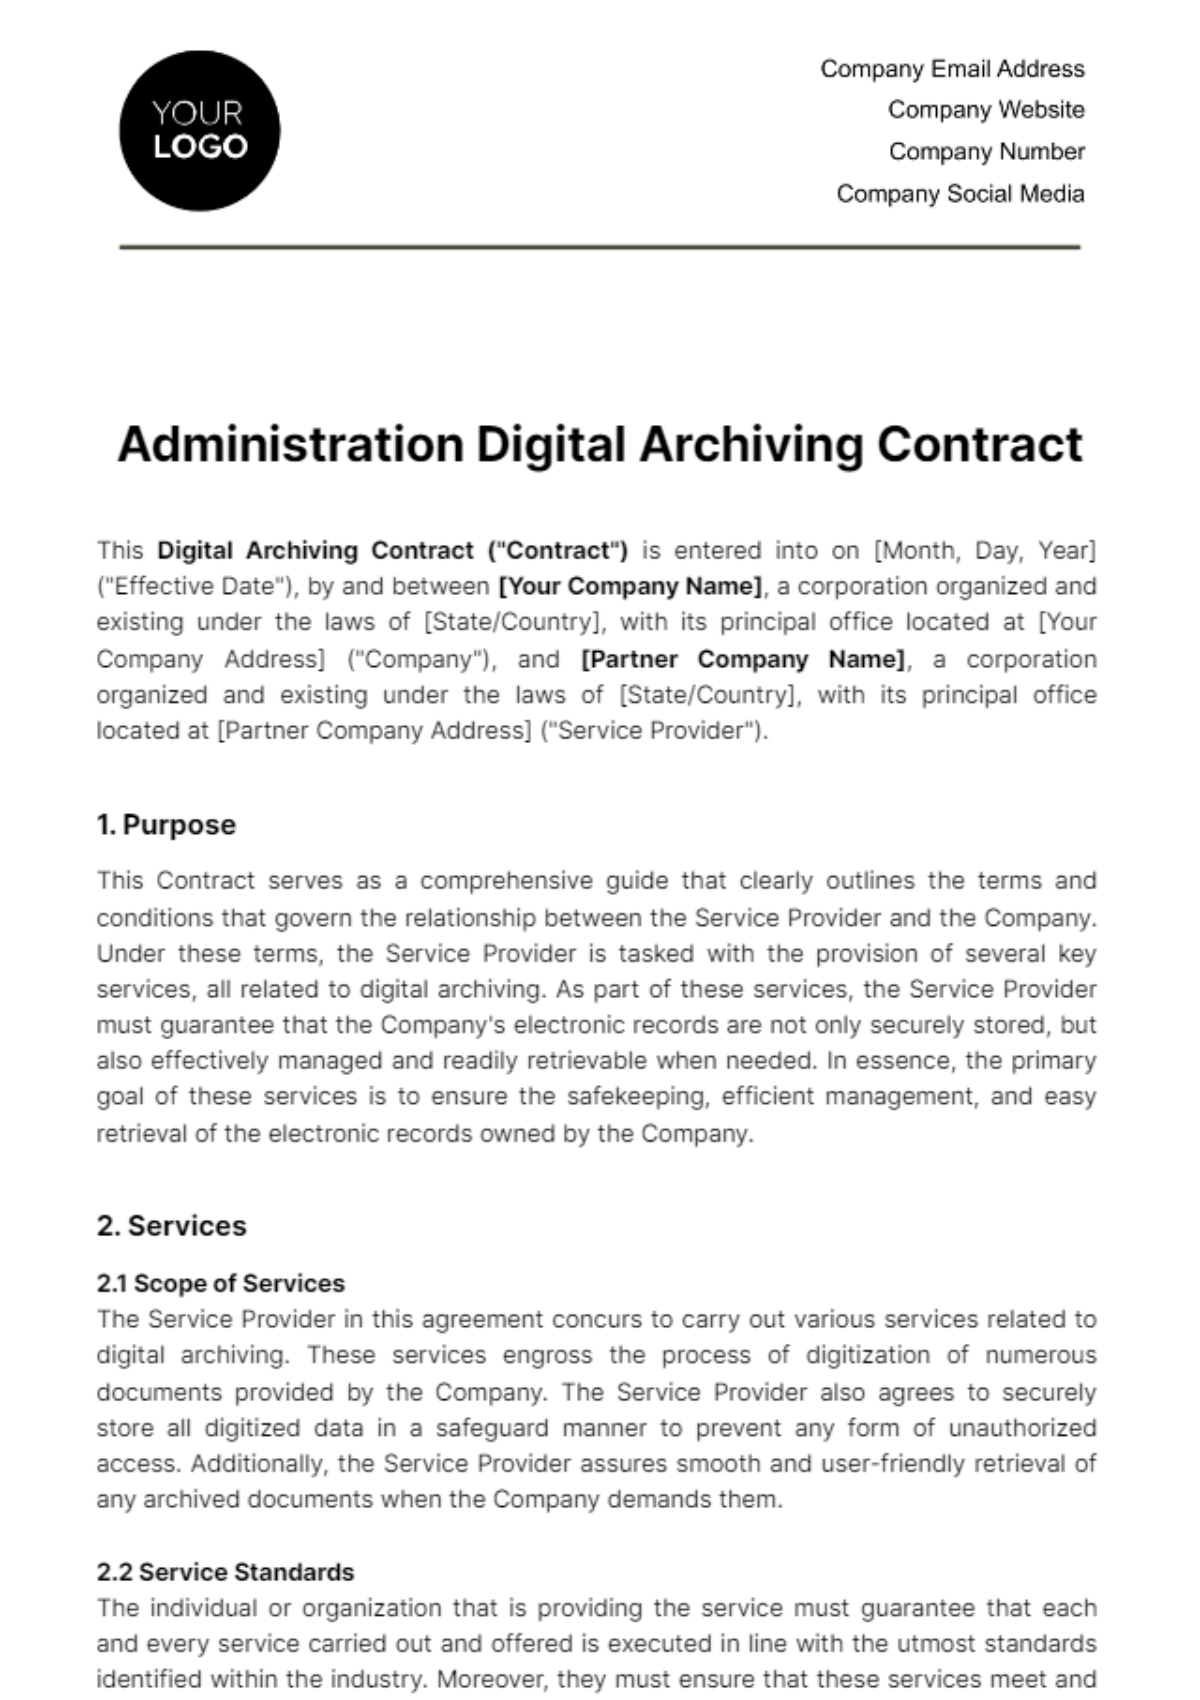 Administration Digital Archiving Contract Template